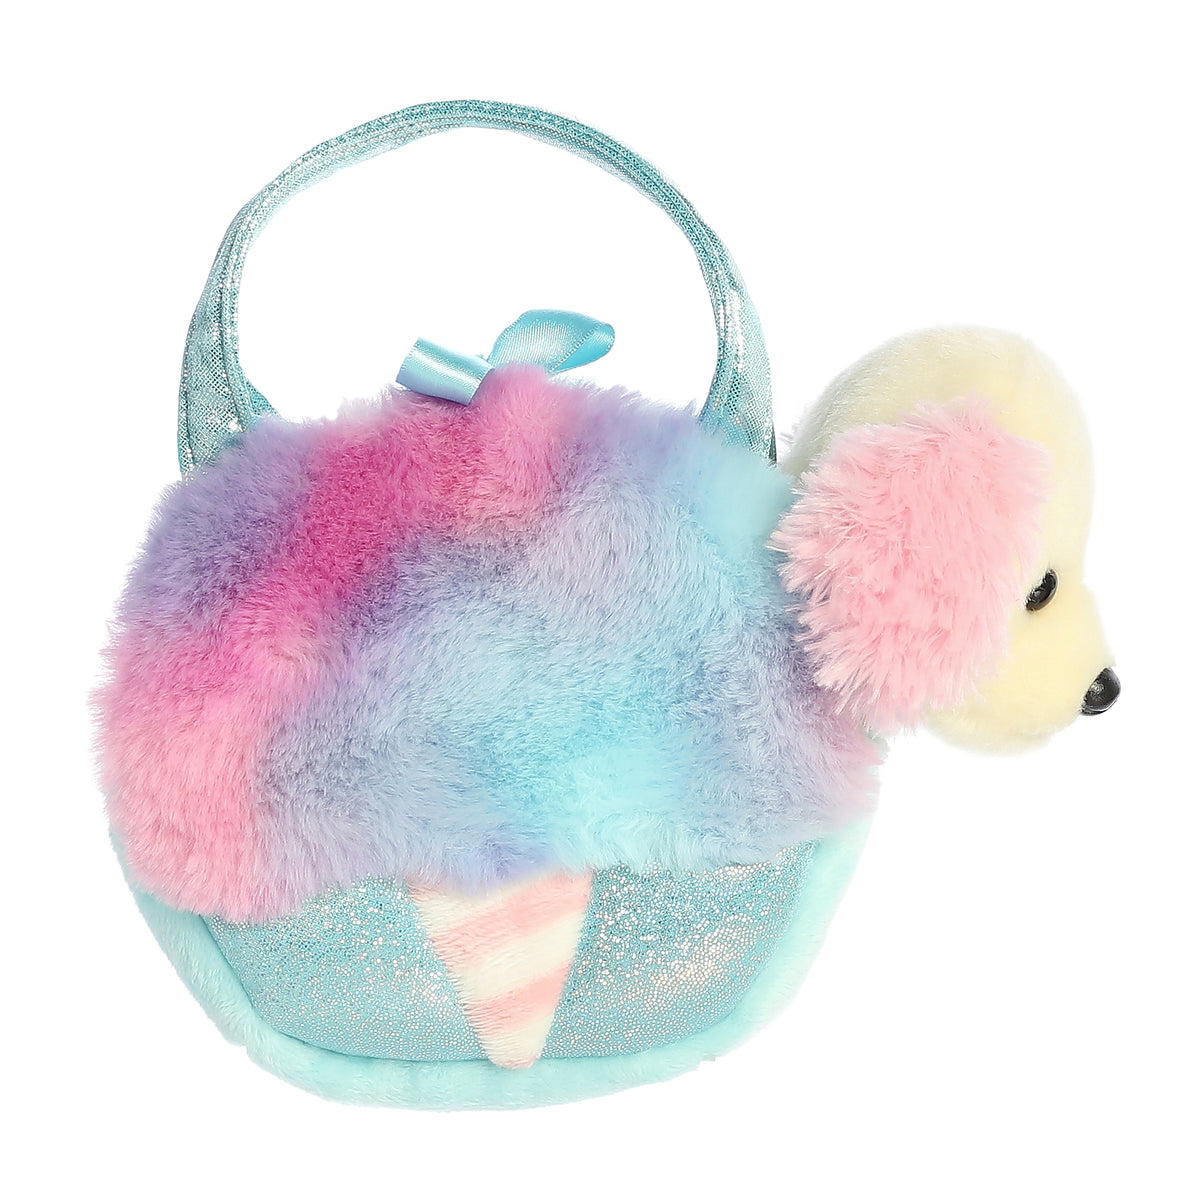 Dreamy blue Cotton Candy plush carrier by Aurora, with metallic straps and a puppy stuffed animal with pink ears inside